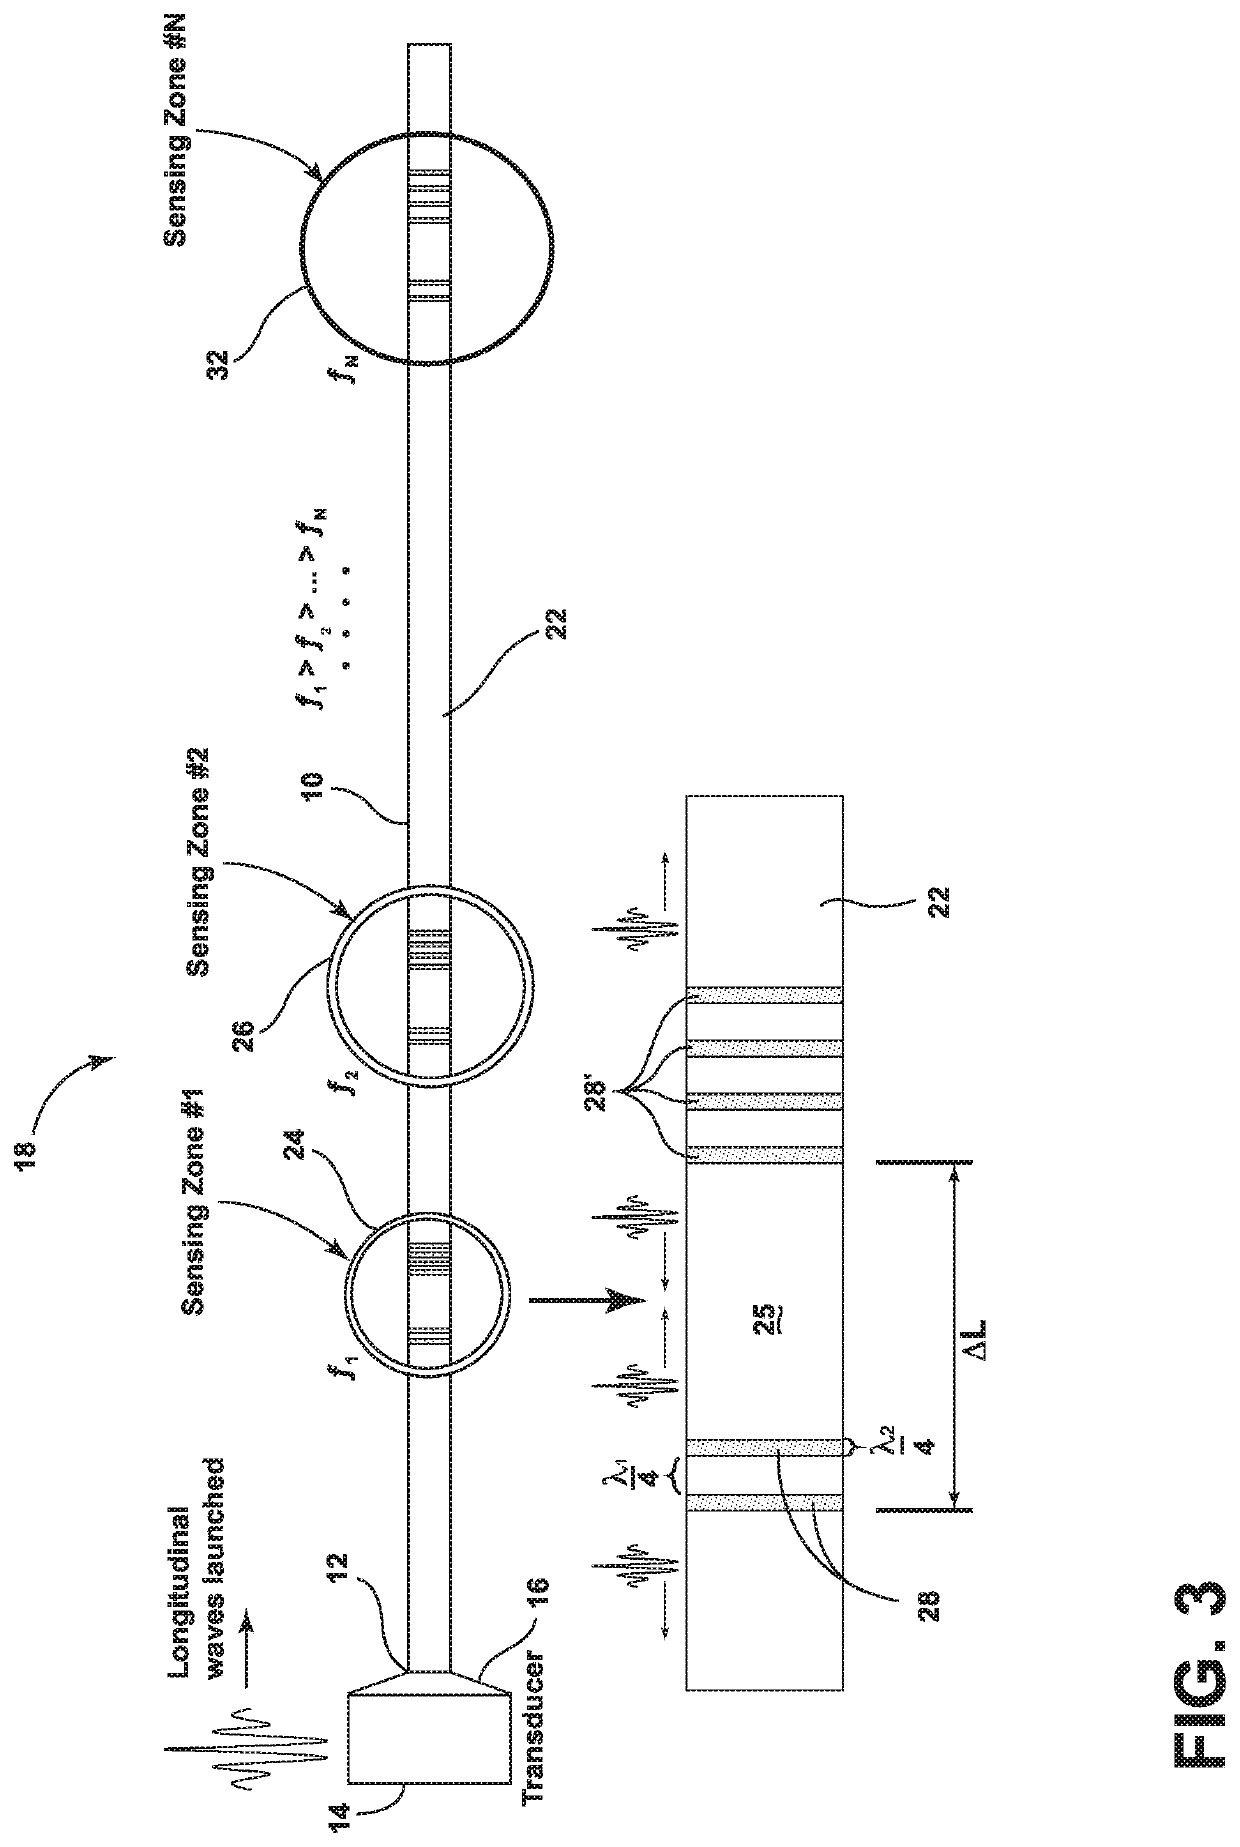 Ultrasonic waveguide for improved ultrasonic thermometry